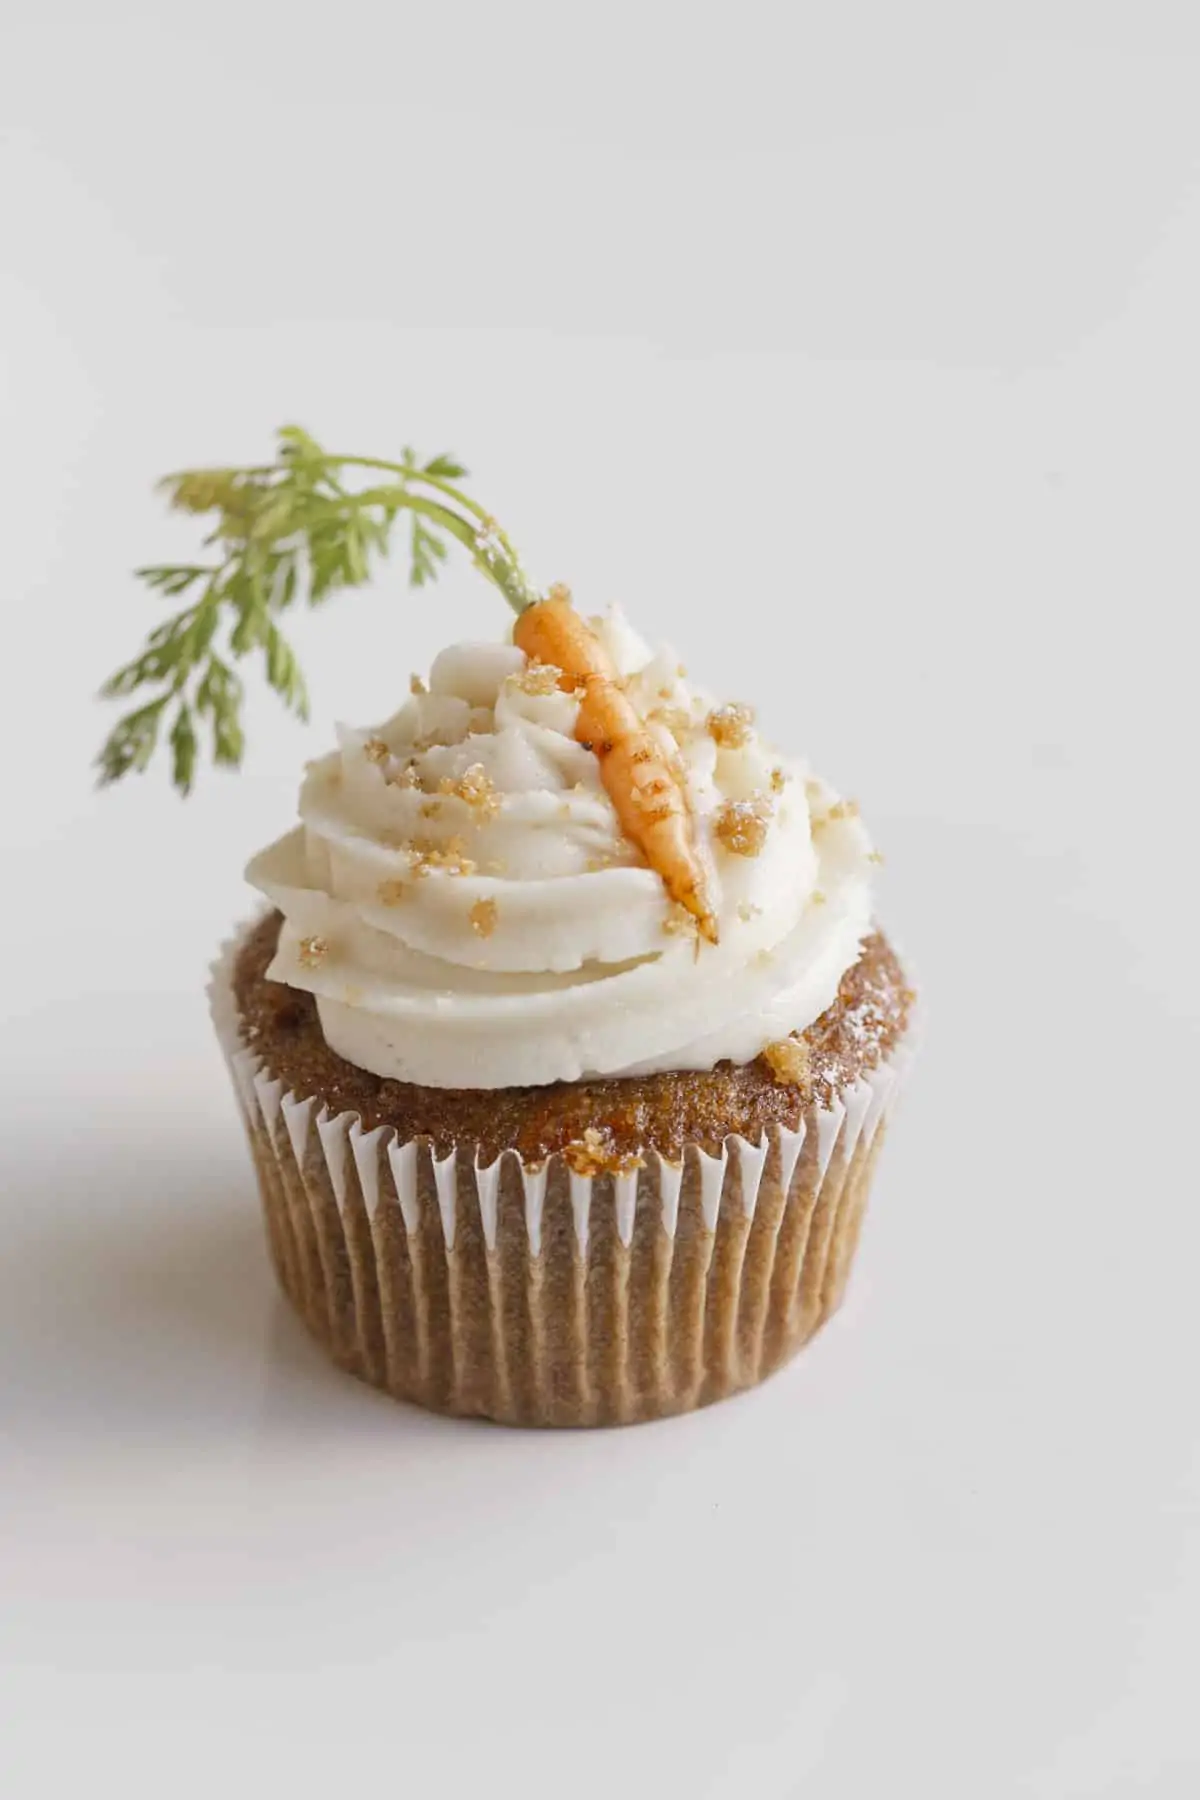 carrot cake for two - cupcake with frosting, crumble, and carrots